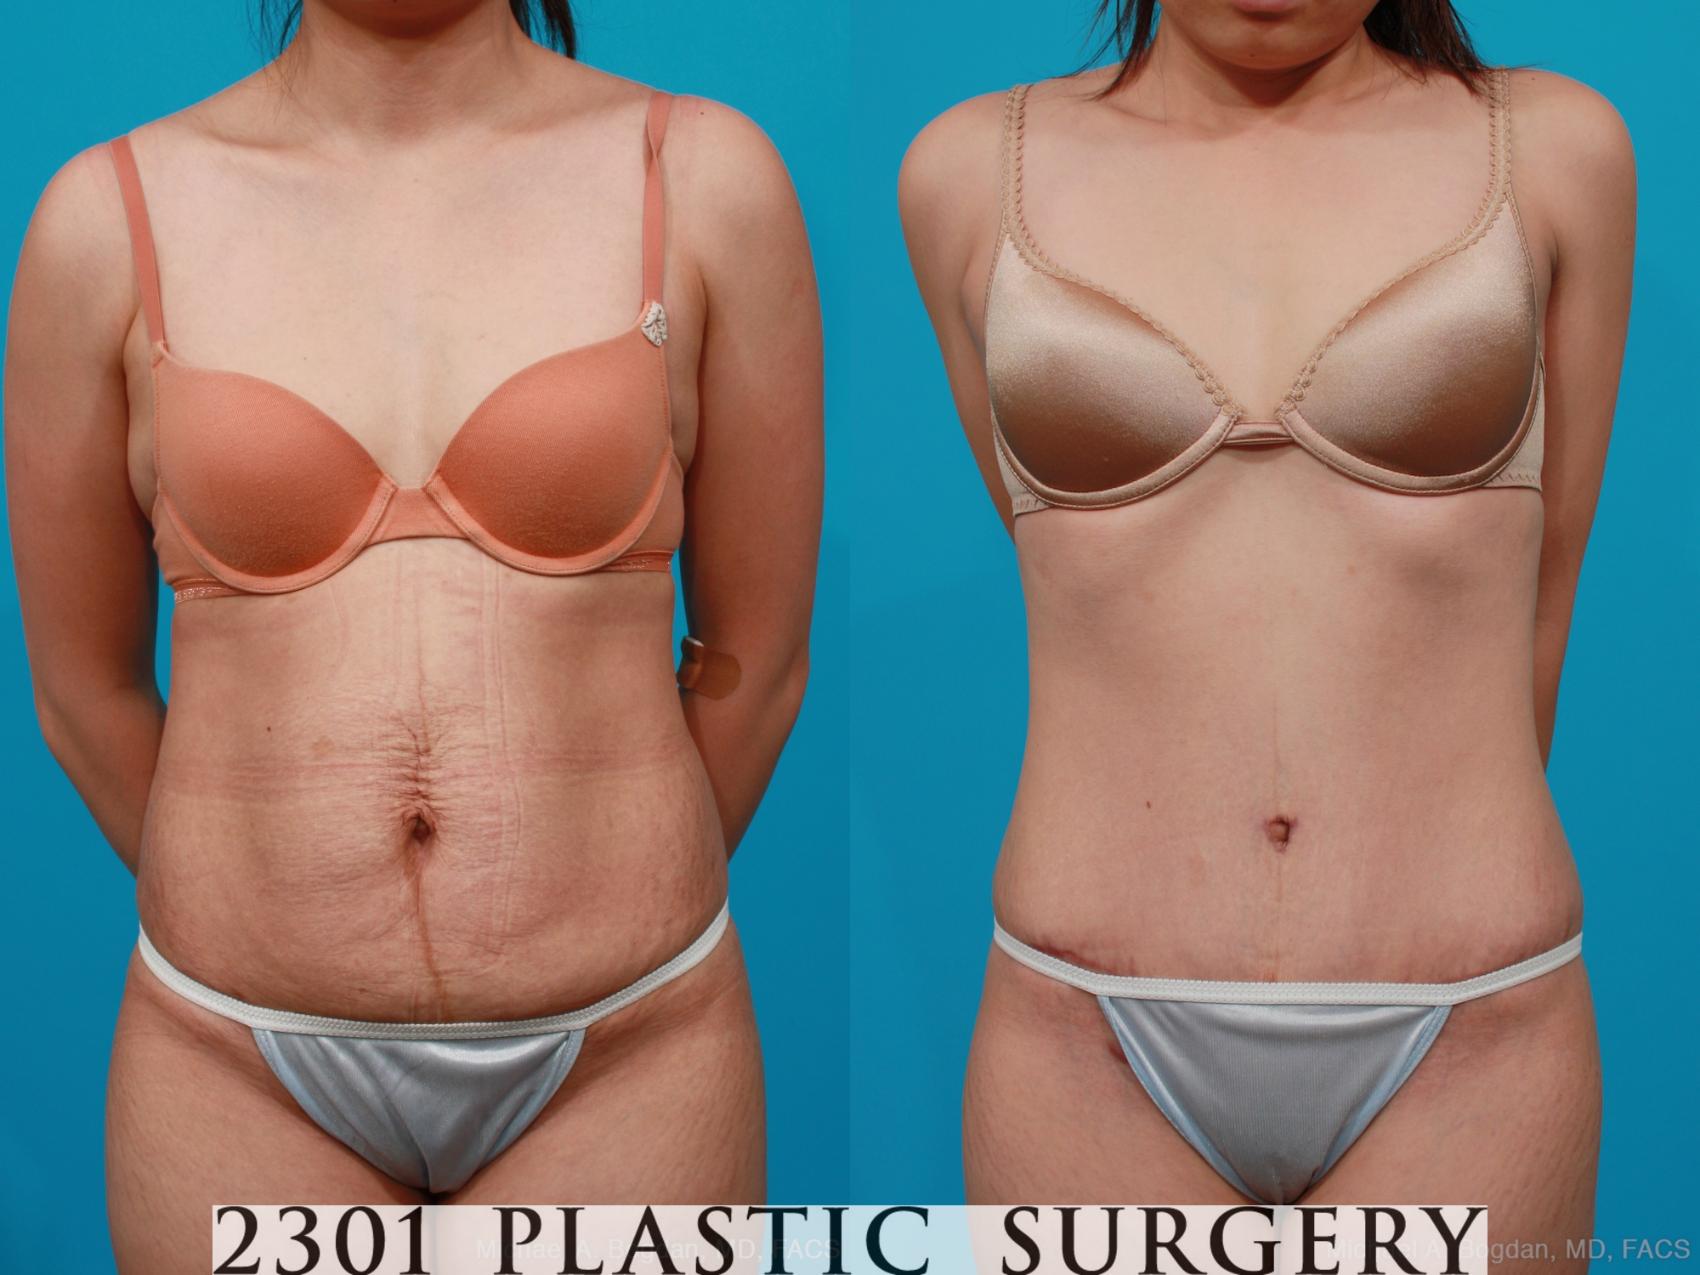 Reverse Tummy Tuck in Plano TX - Trim Your Midsection